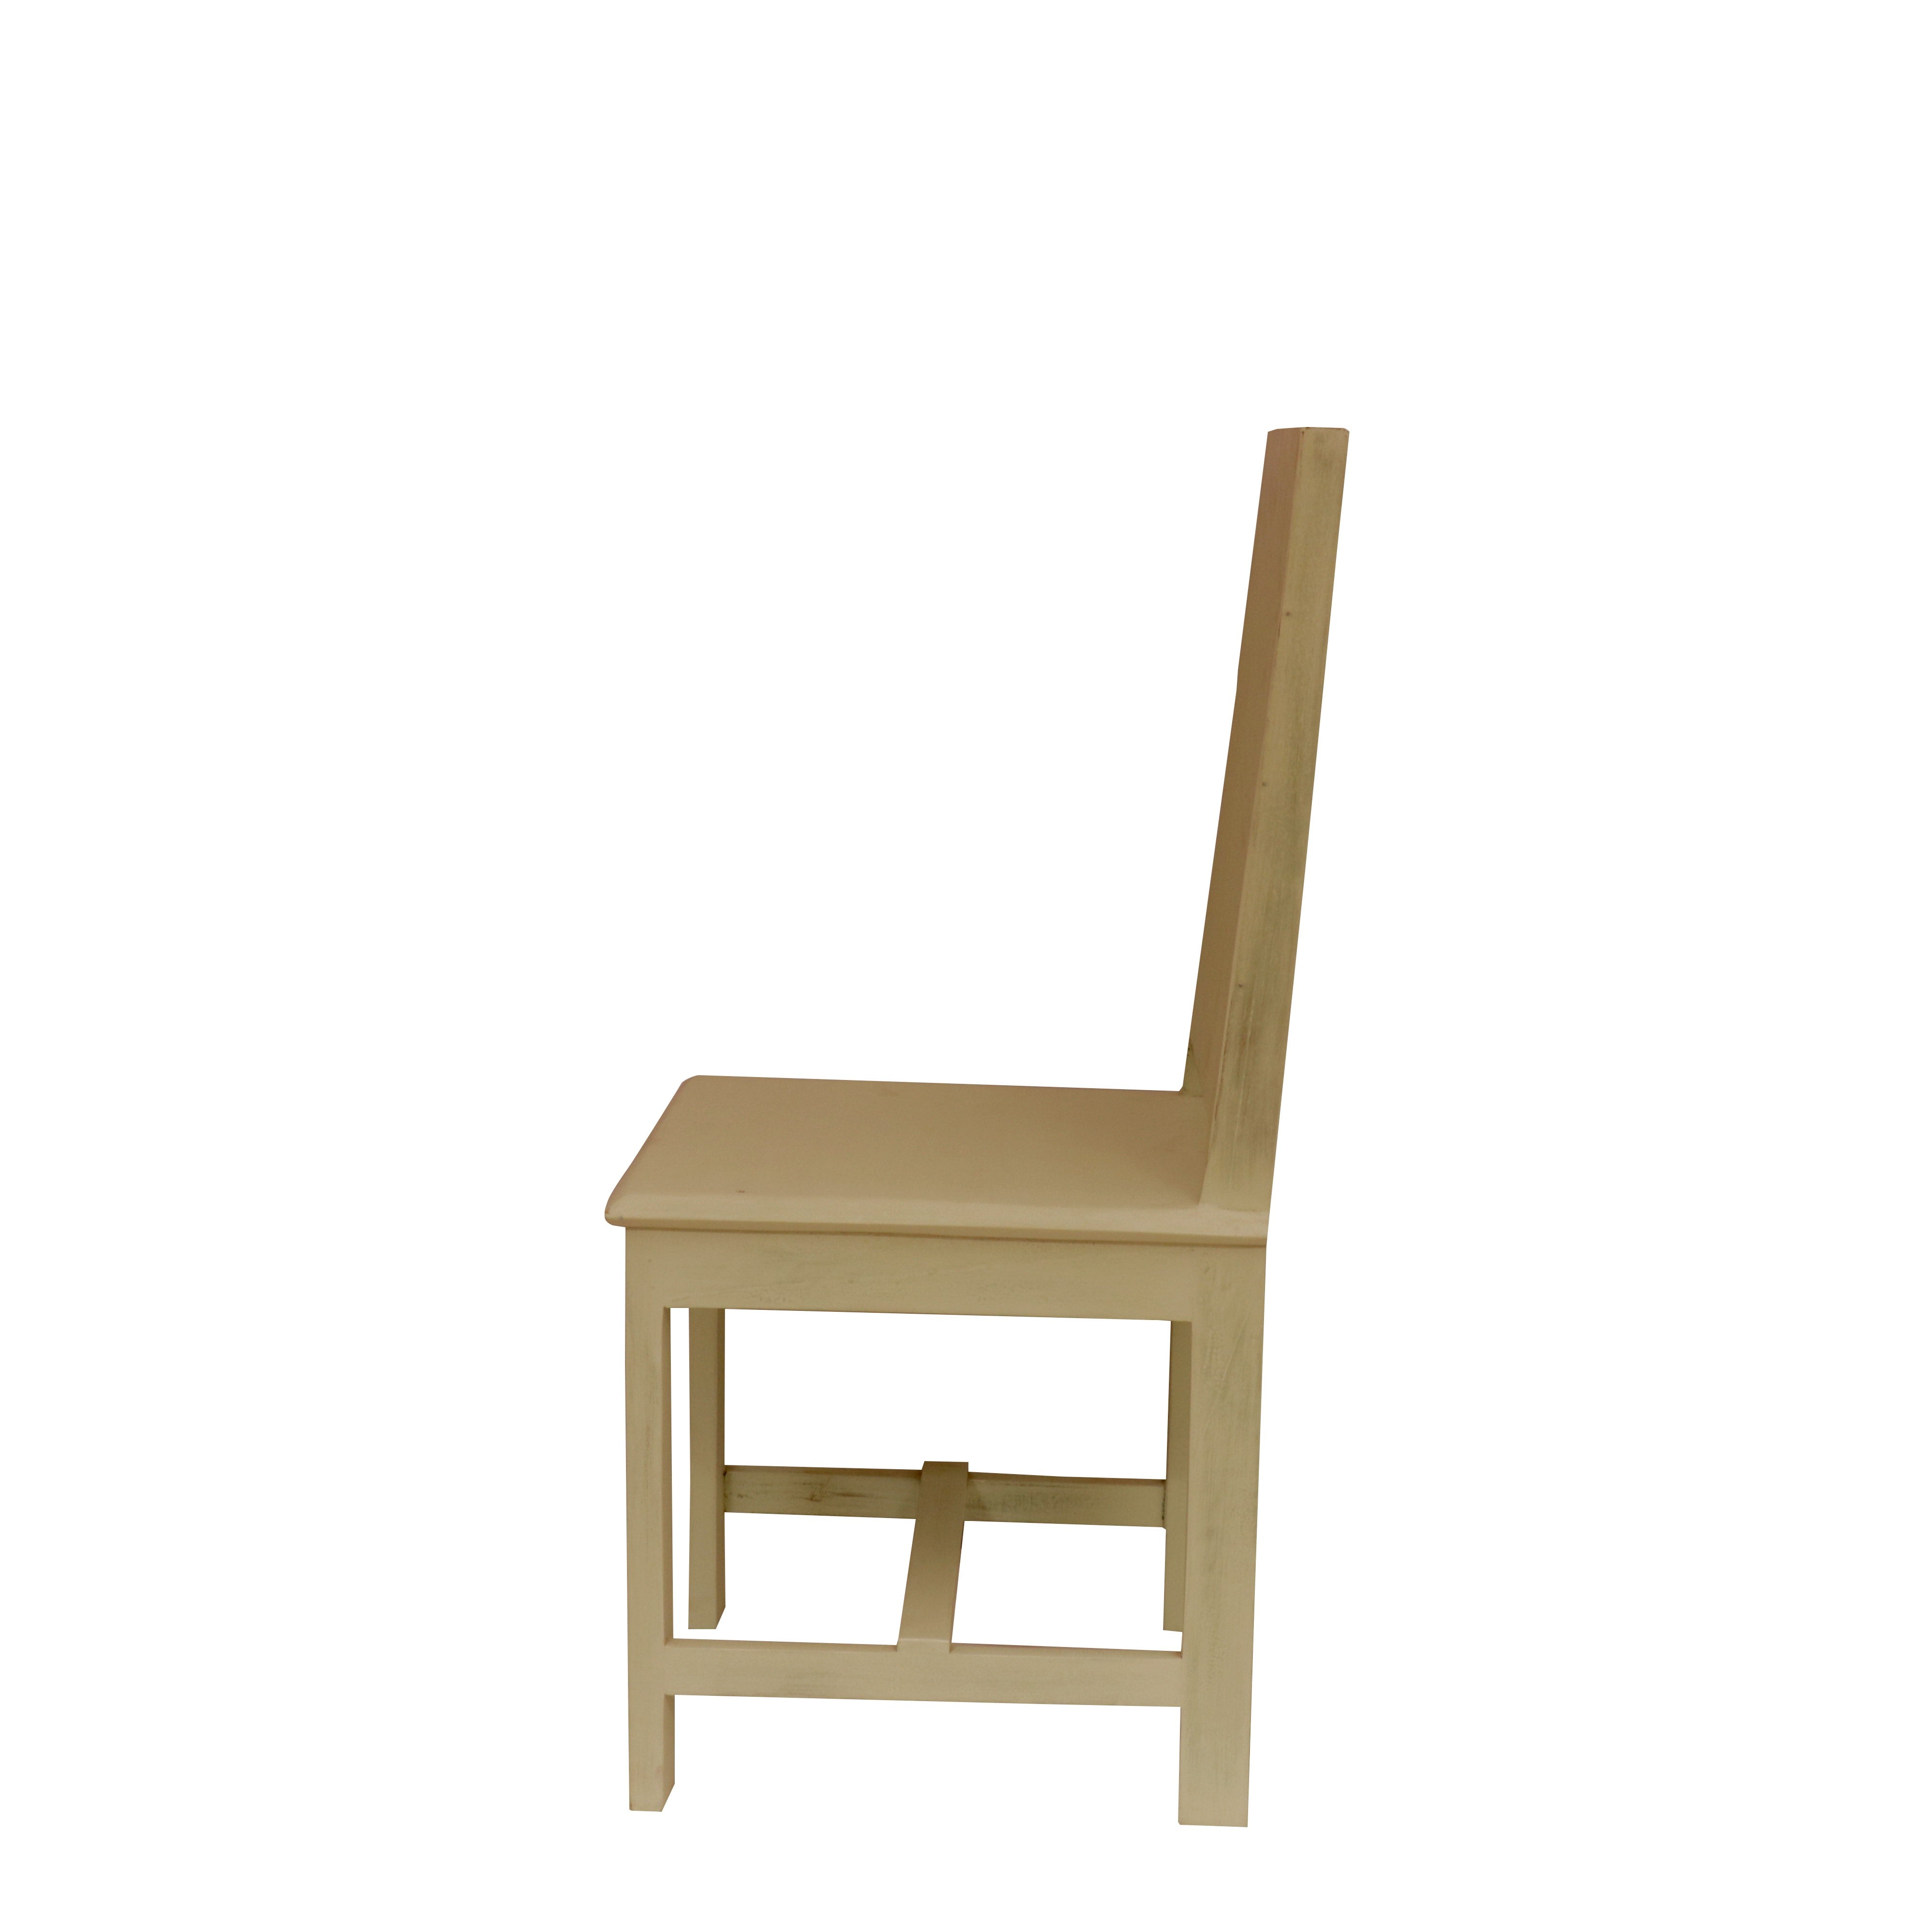 (Set of 2) Simple Cream Hued Chair Dining Chair